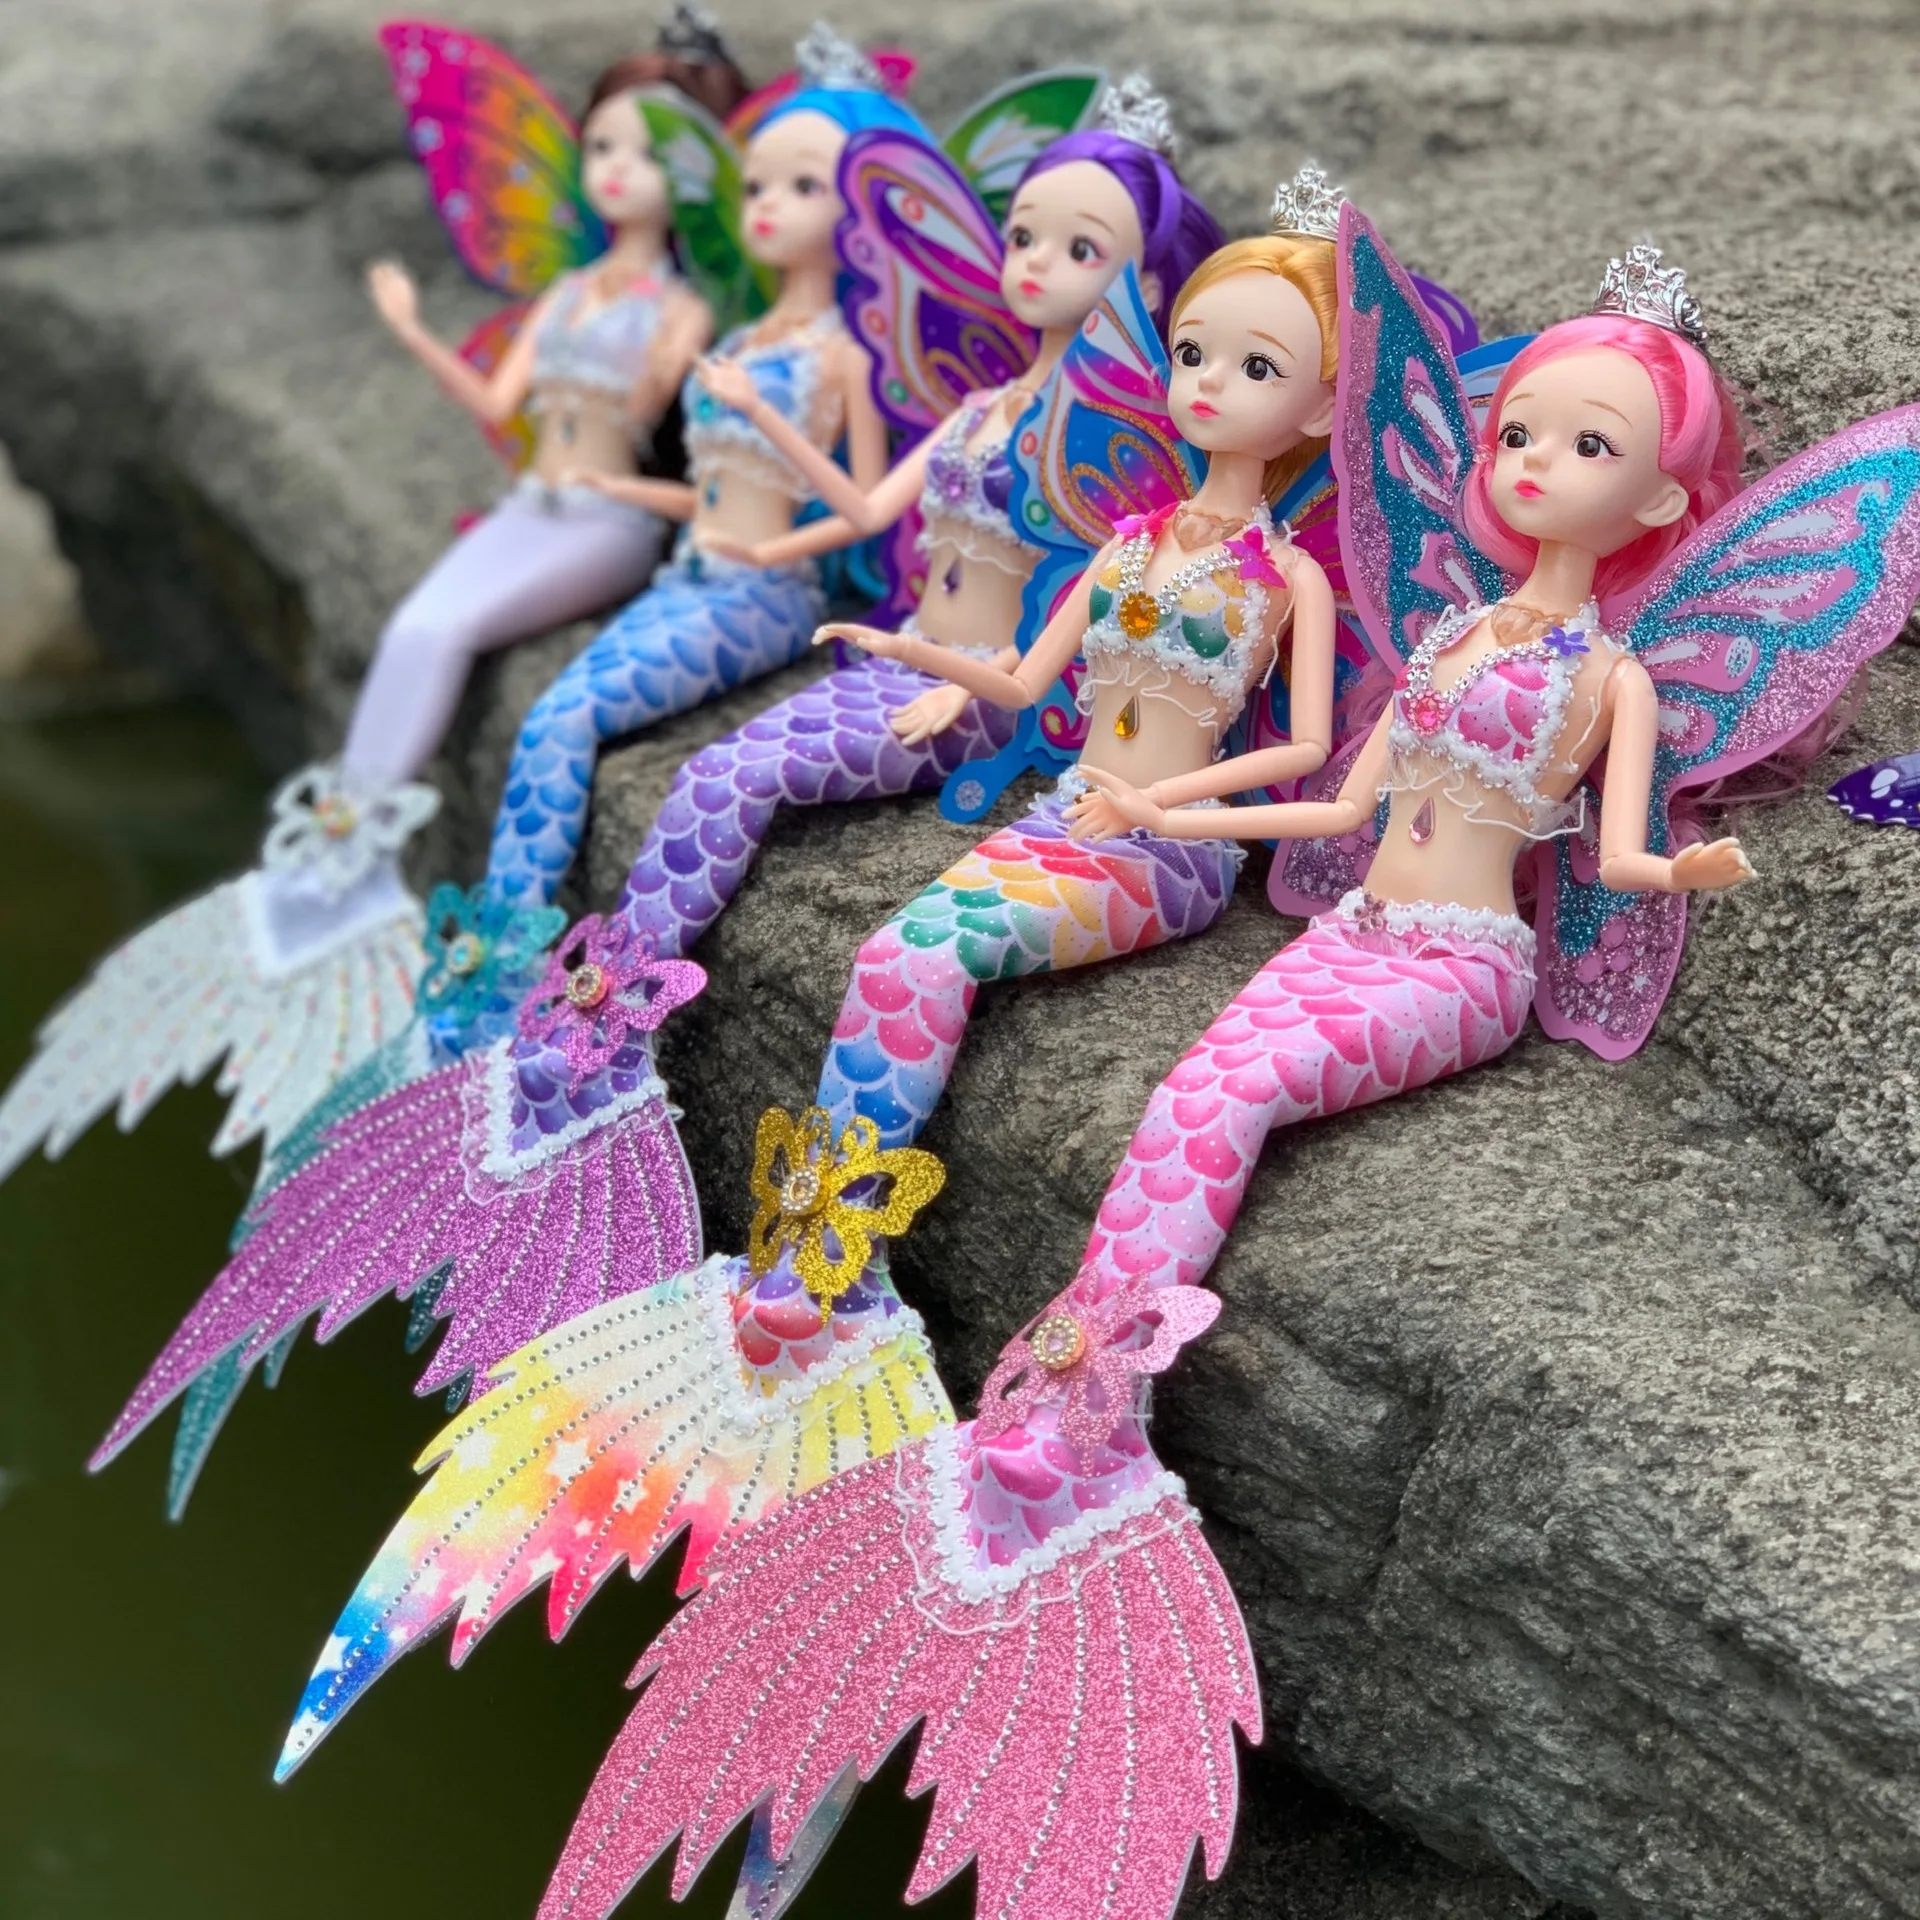  Hair Accessories Mermaid Toys Gifts for Girls: 6 7 8 9